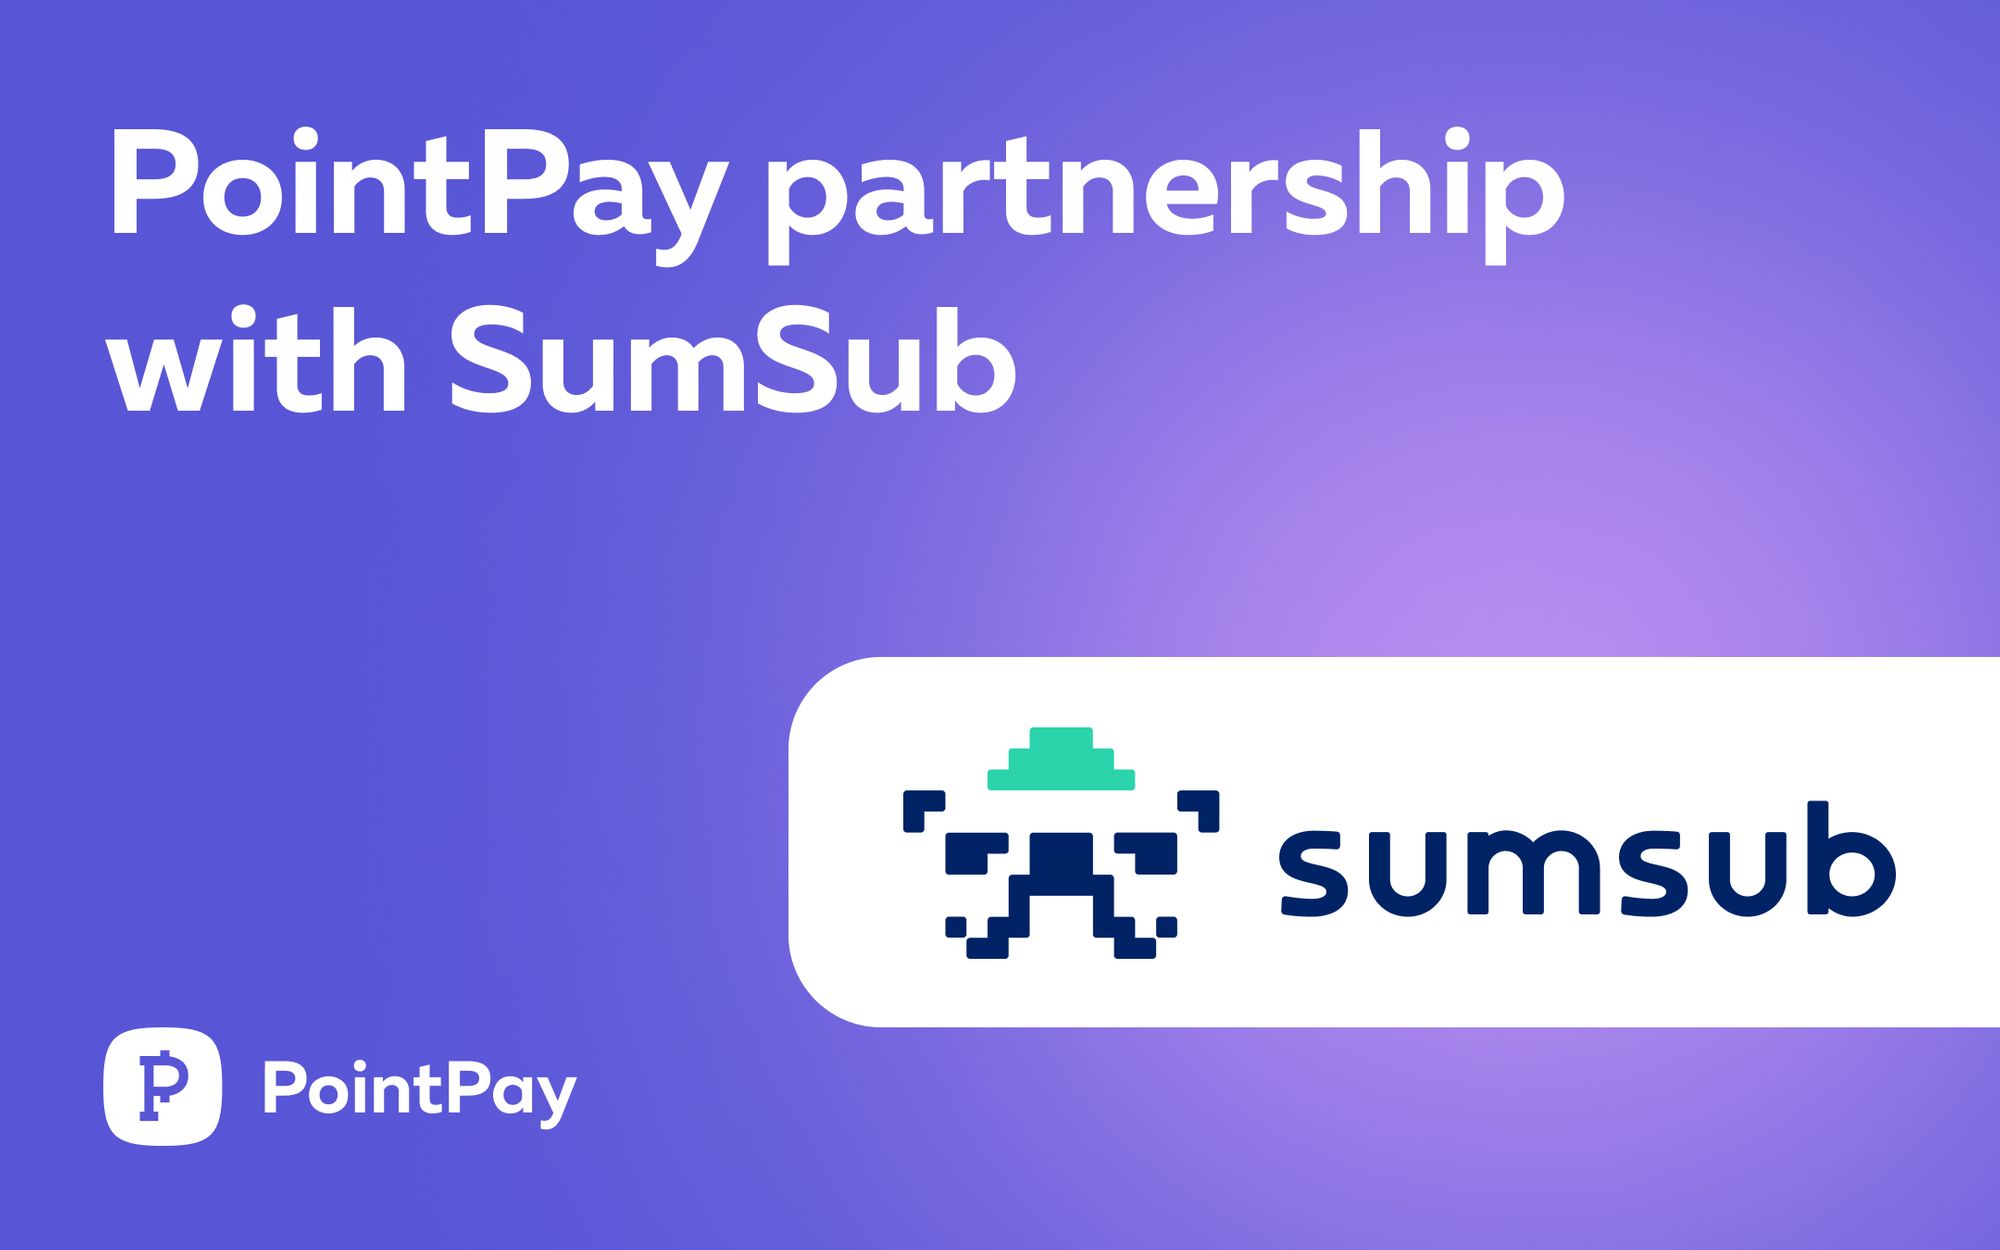 PointPay partners with Sumsub, Online Identity Verification Service